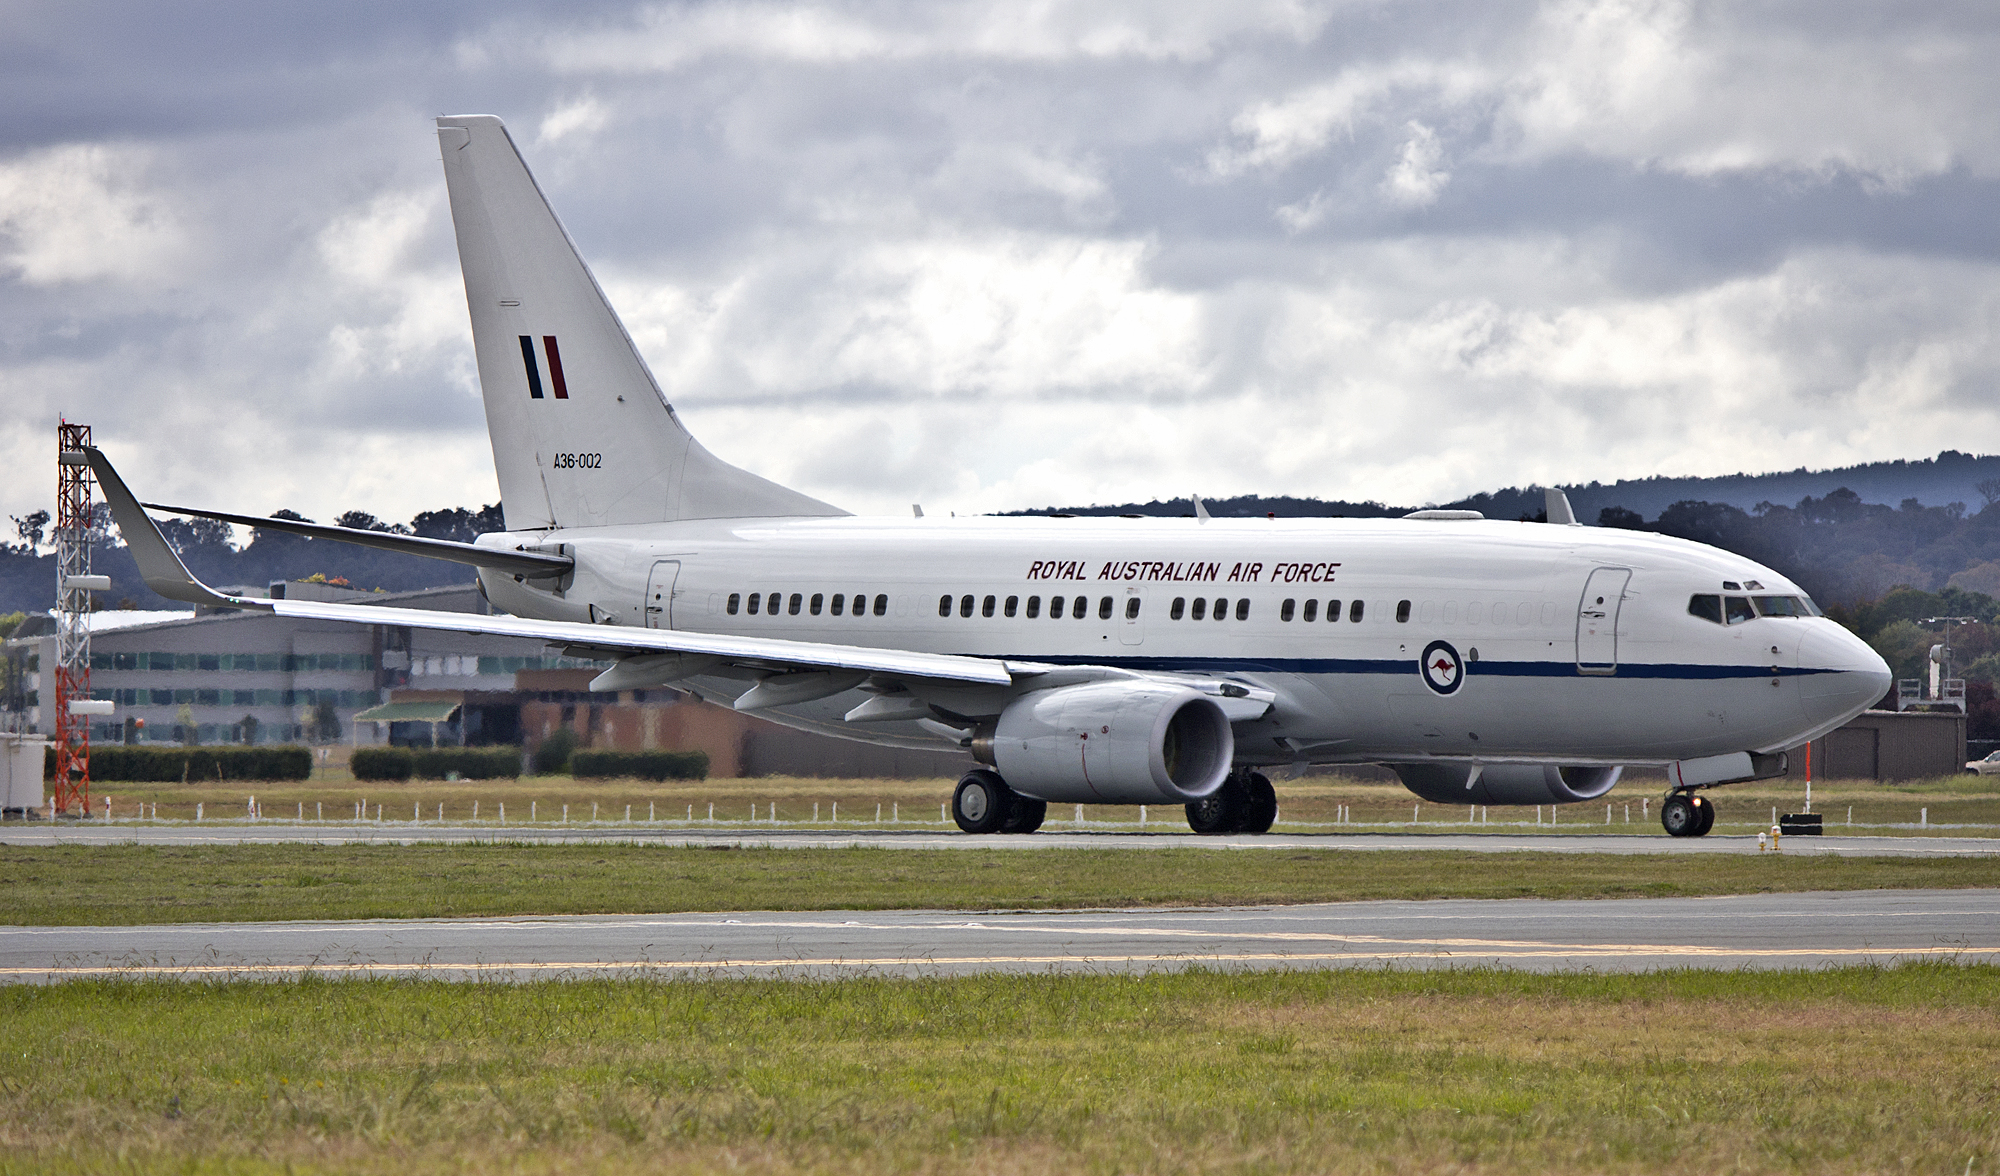 Legende bunke Præferencebehandling File:Royal Australian Air Force (A36-002) Boeing 737-7DF BBJ on the main  runway at the Canberra Airport.jpg - Wikimedia Commons